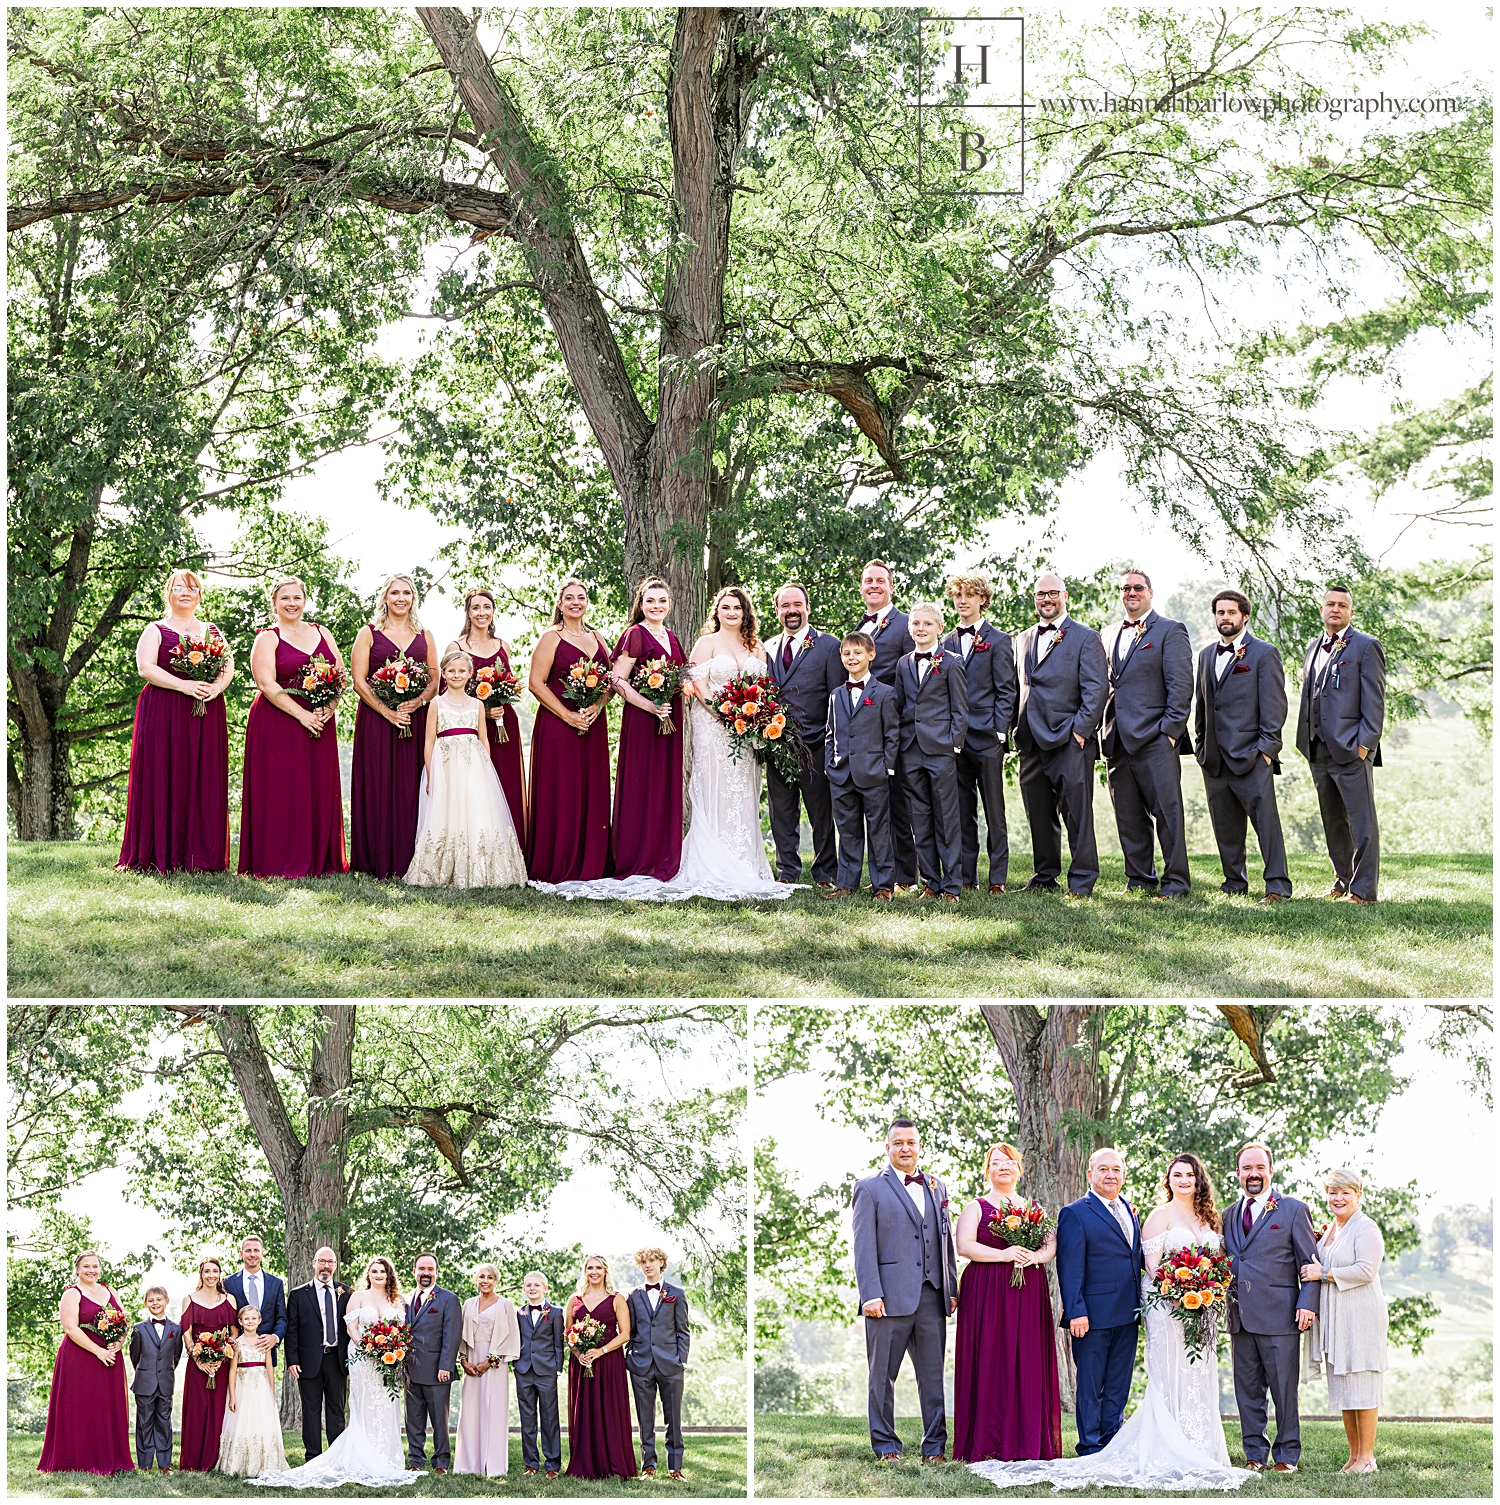 Bridal party and family photo.